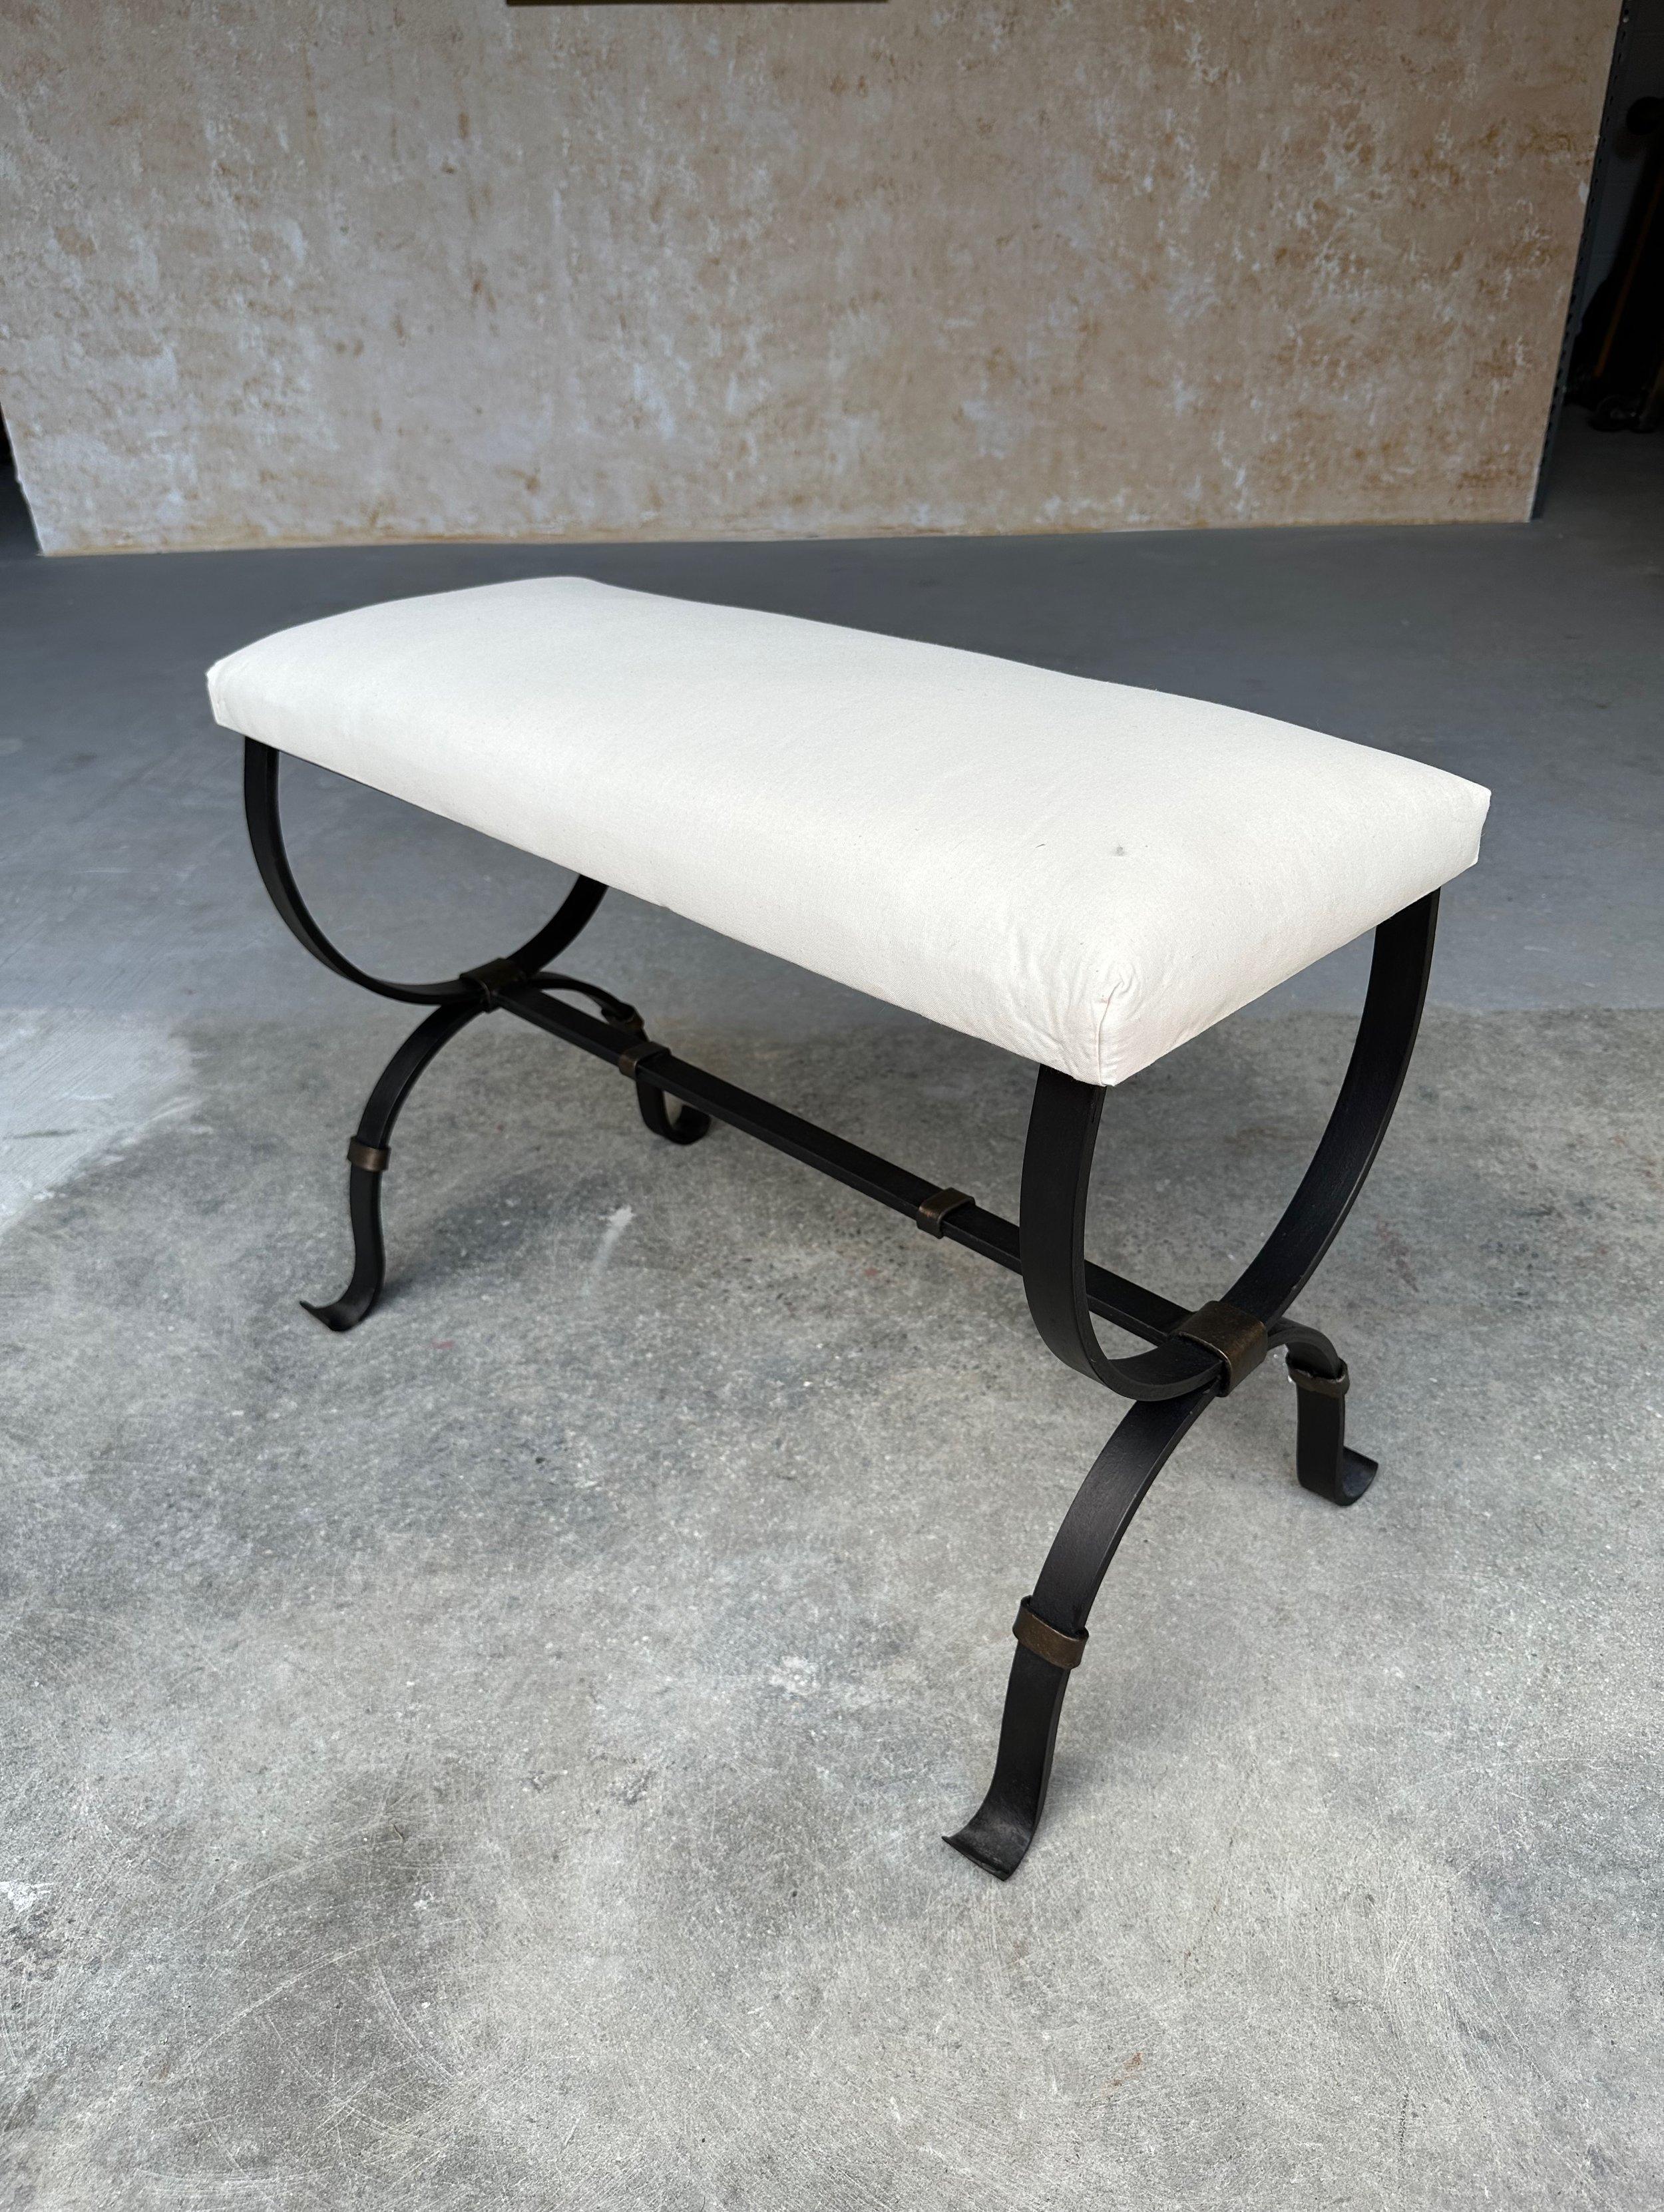 This elegant iron bench was recently made by skilled European artisans and features gently scrolled legs and stretcher with decorative band details. Handmade by expert craftsmen, it has a hand forged iron base with a hand applied matte black finish